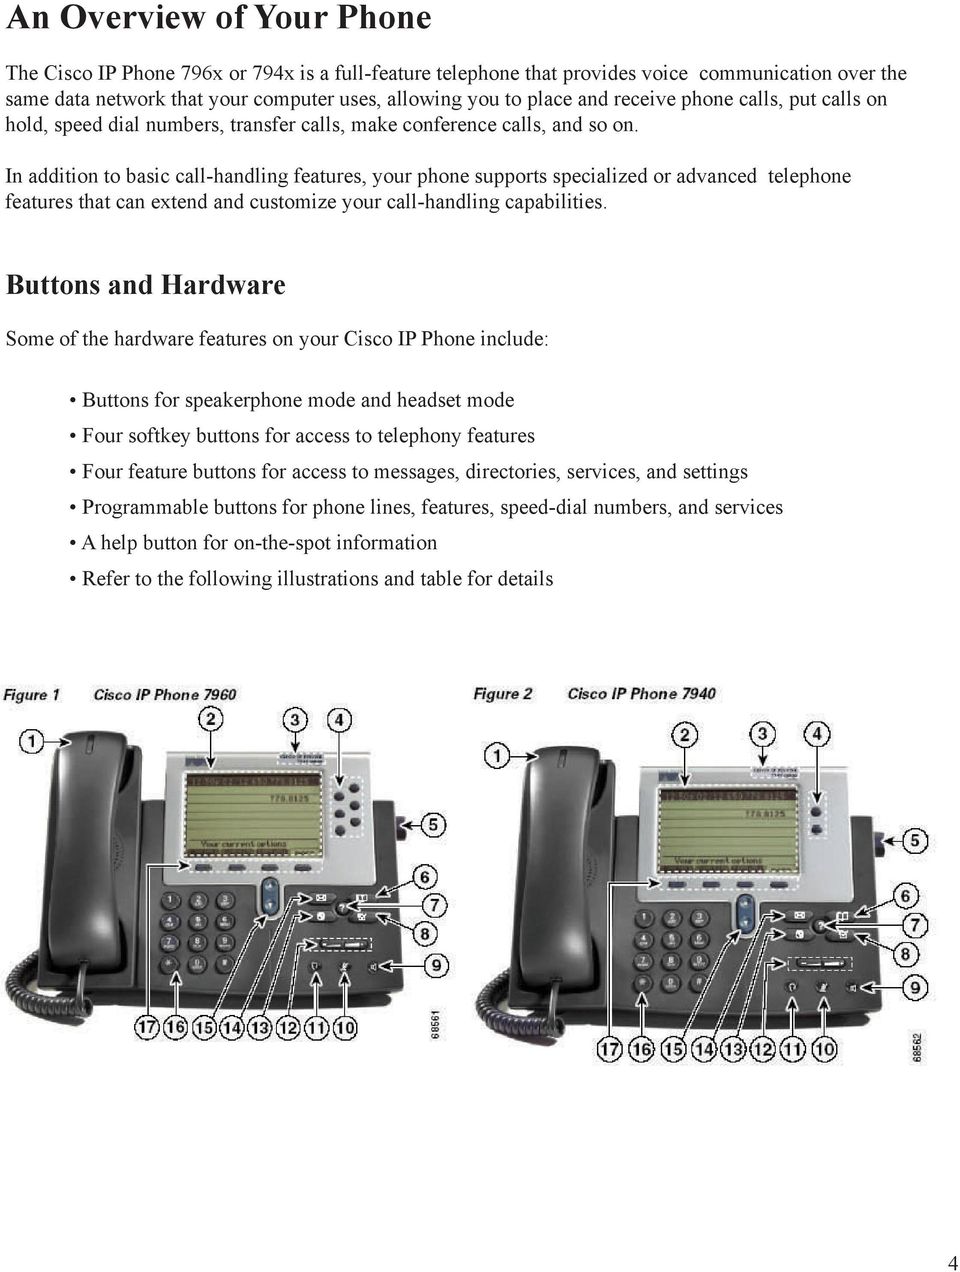 In addition to basic call-handling features, your phone supports specialized or advanced telephone features that can extend and customize your call-handling capabilities.